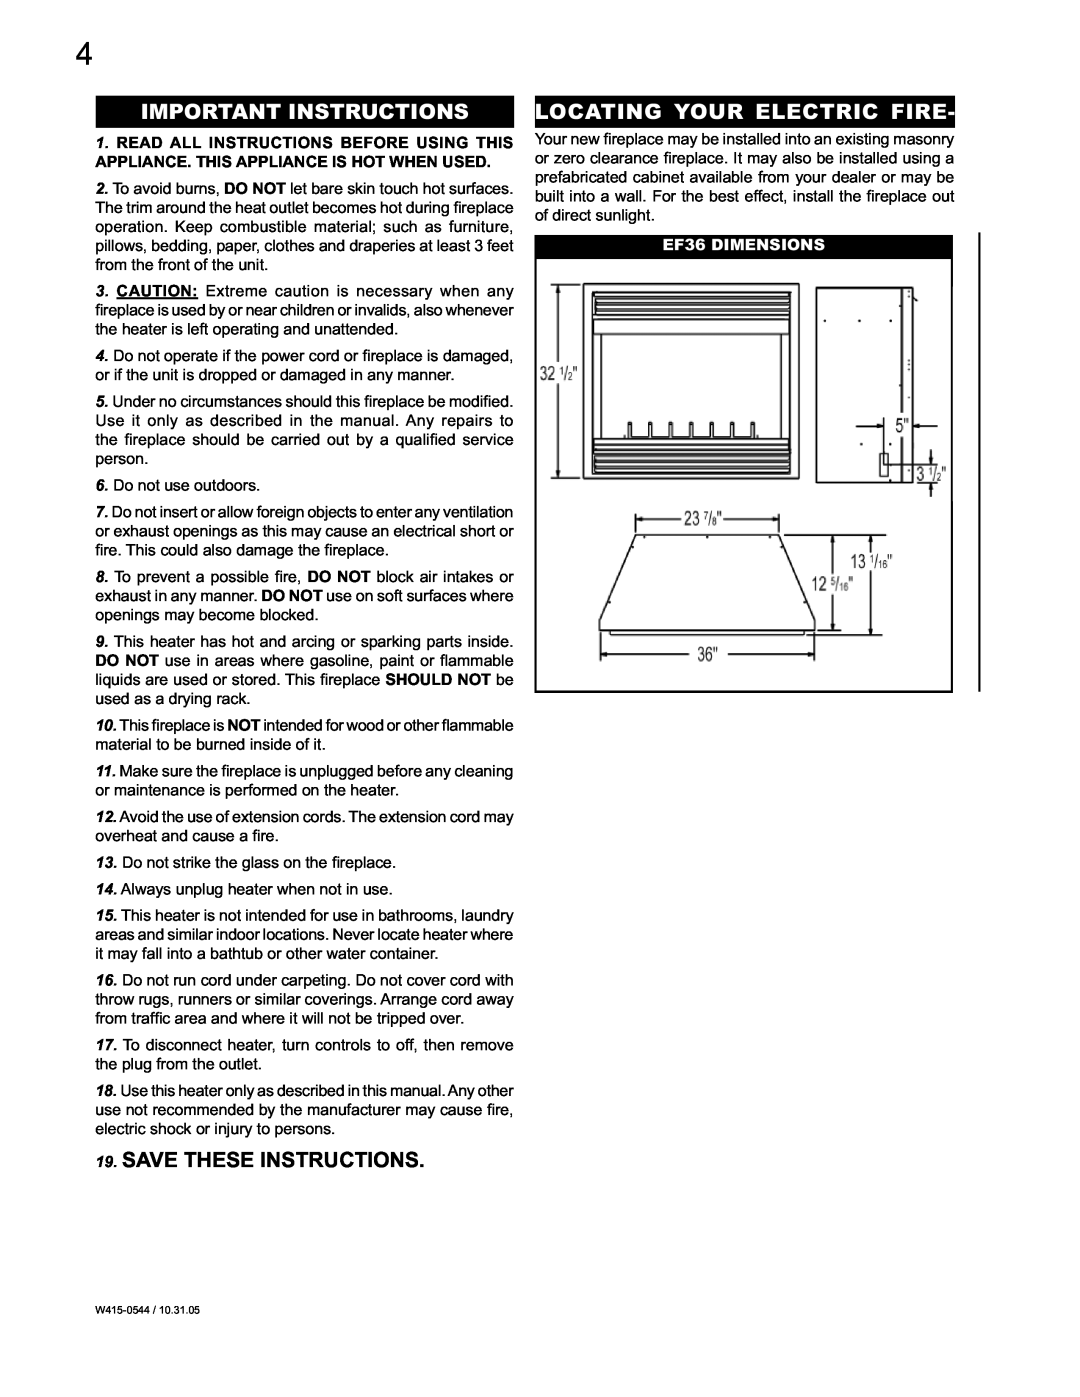 Napoleon Fireplaces EF36H Important Instructions, Locating Your Electric Fire, Save These Instructions, EF36 DIMENSIONS 